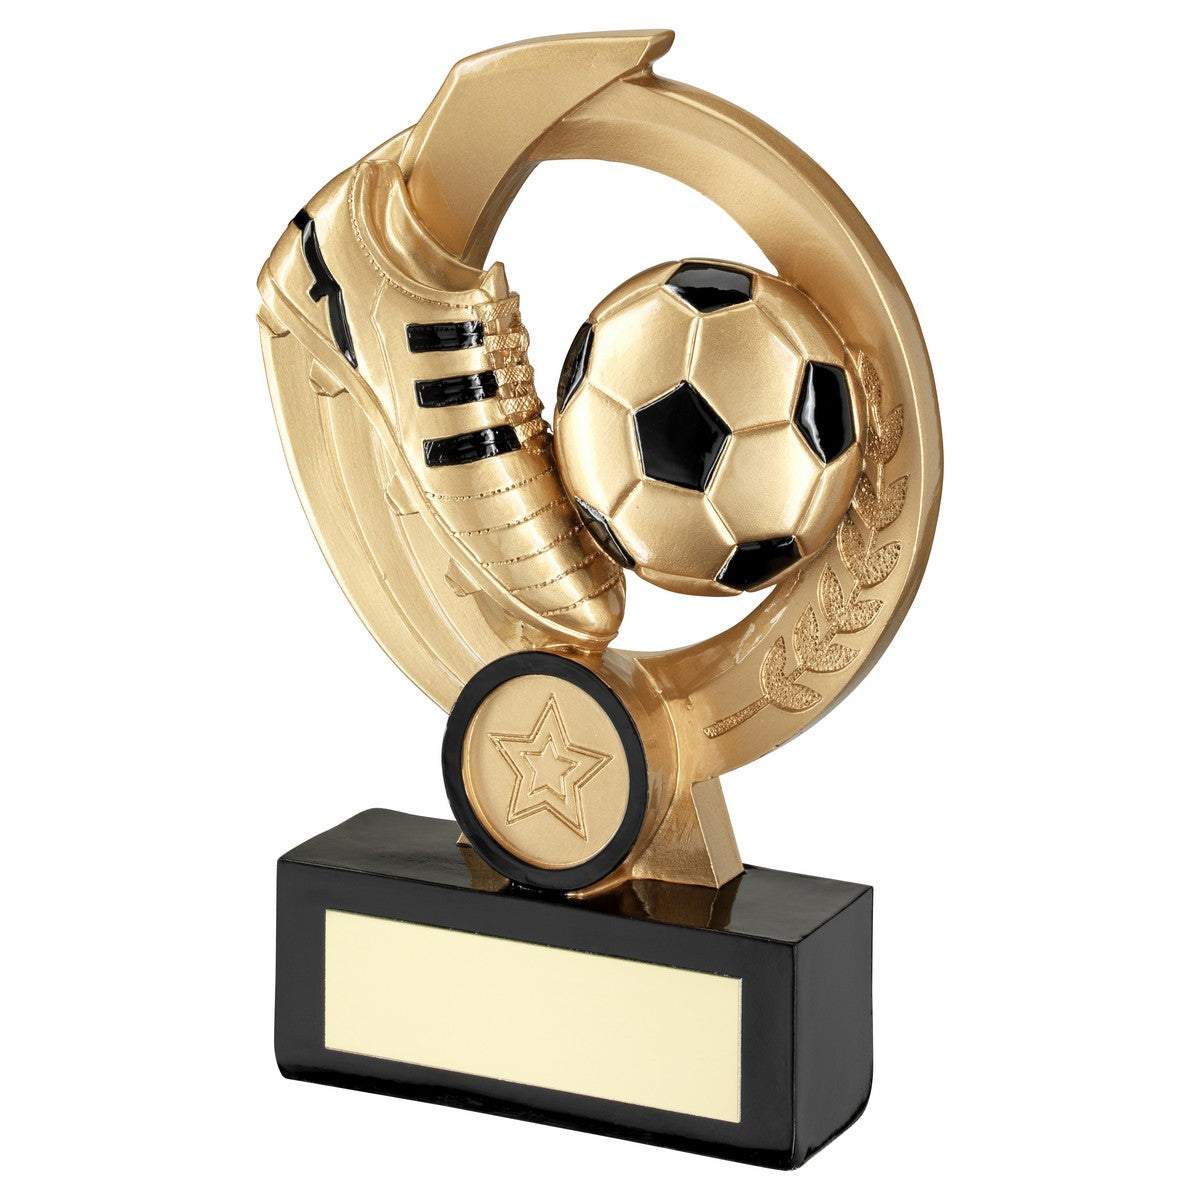 Football and Boot on Round Wreath Trophy